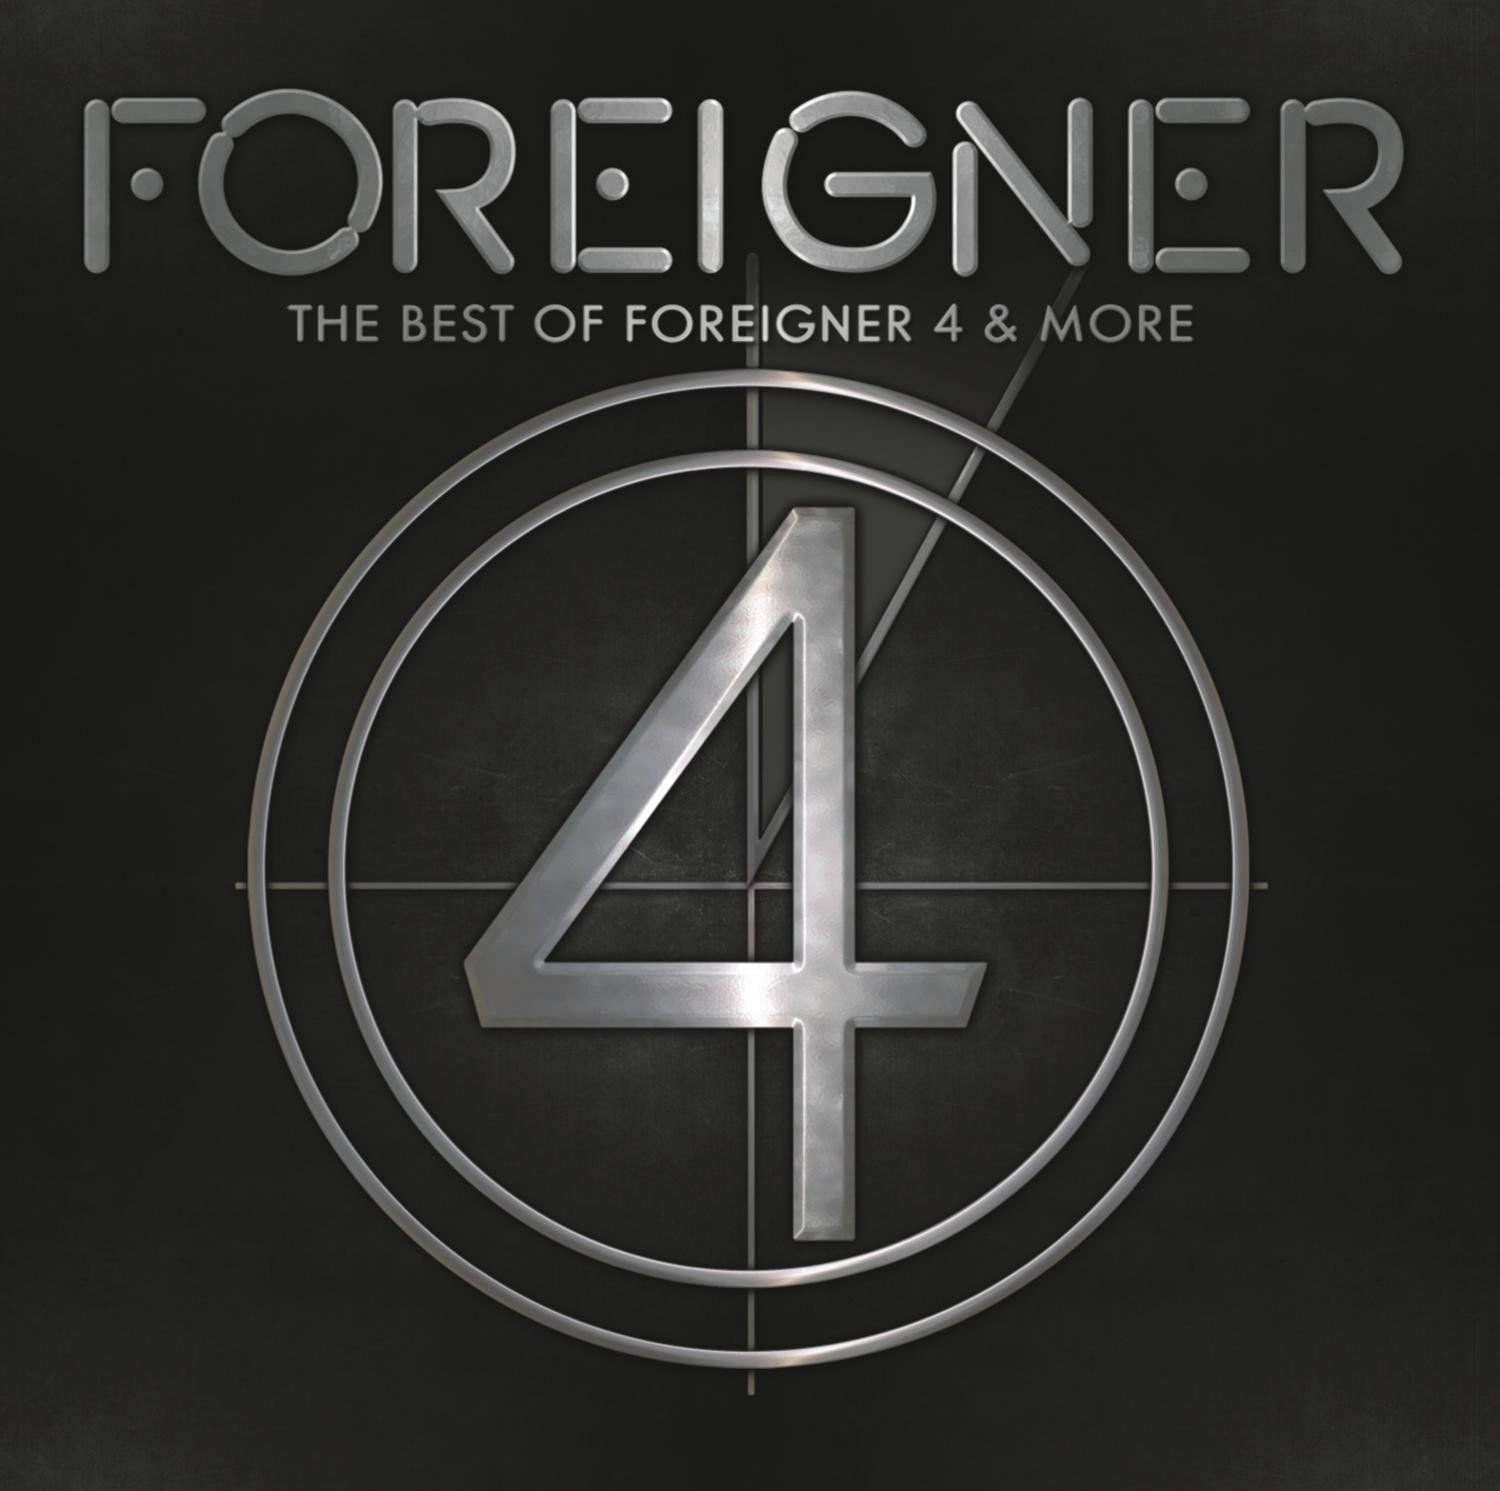 Foreigner Logo - Foreigner - The Best of Foreigner 4 & More - Amazon.com Music